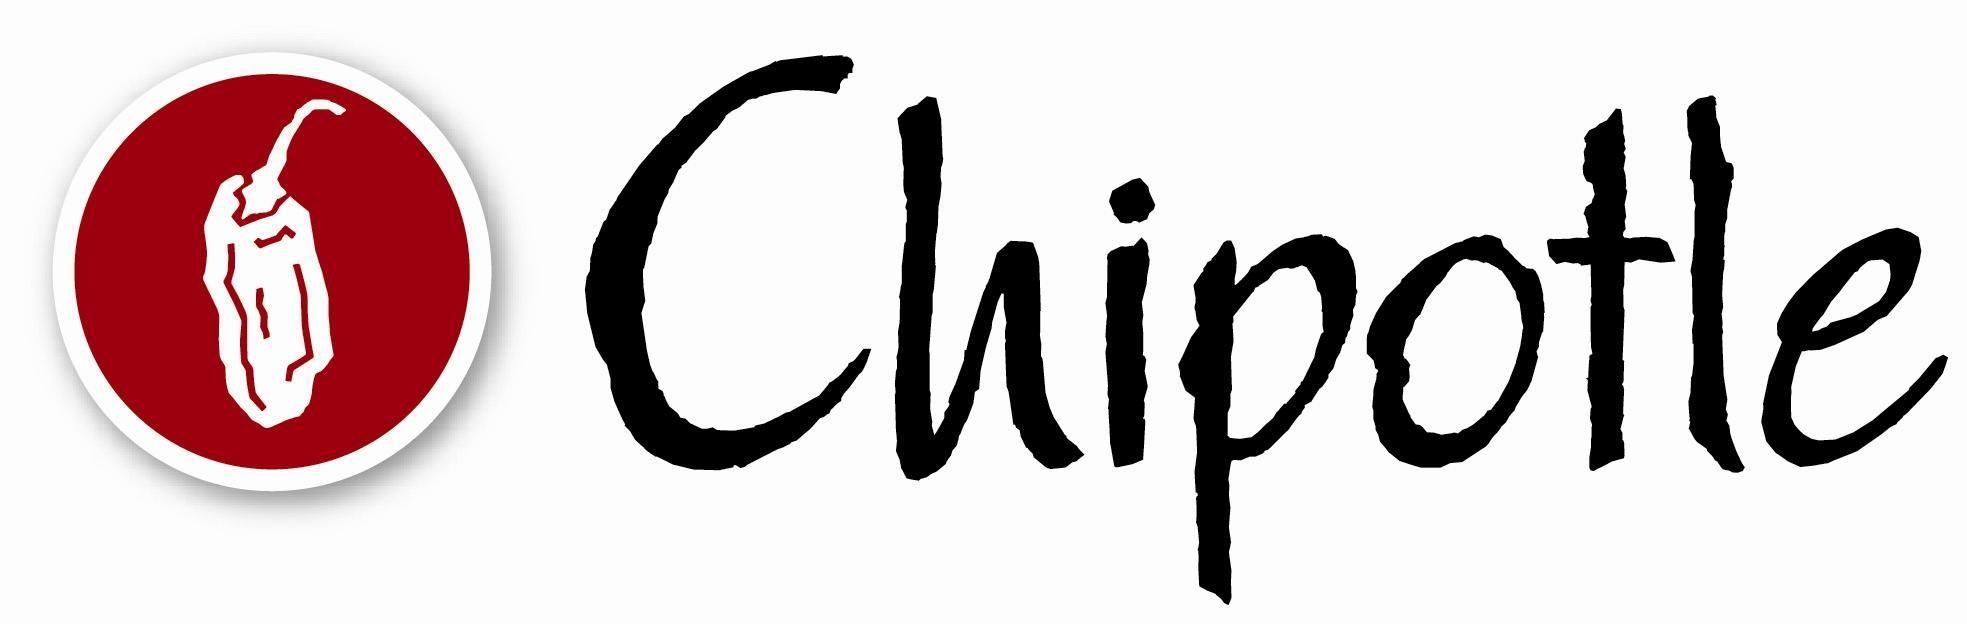 Chipotle Mexican Grill companies Videos Image WebSites